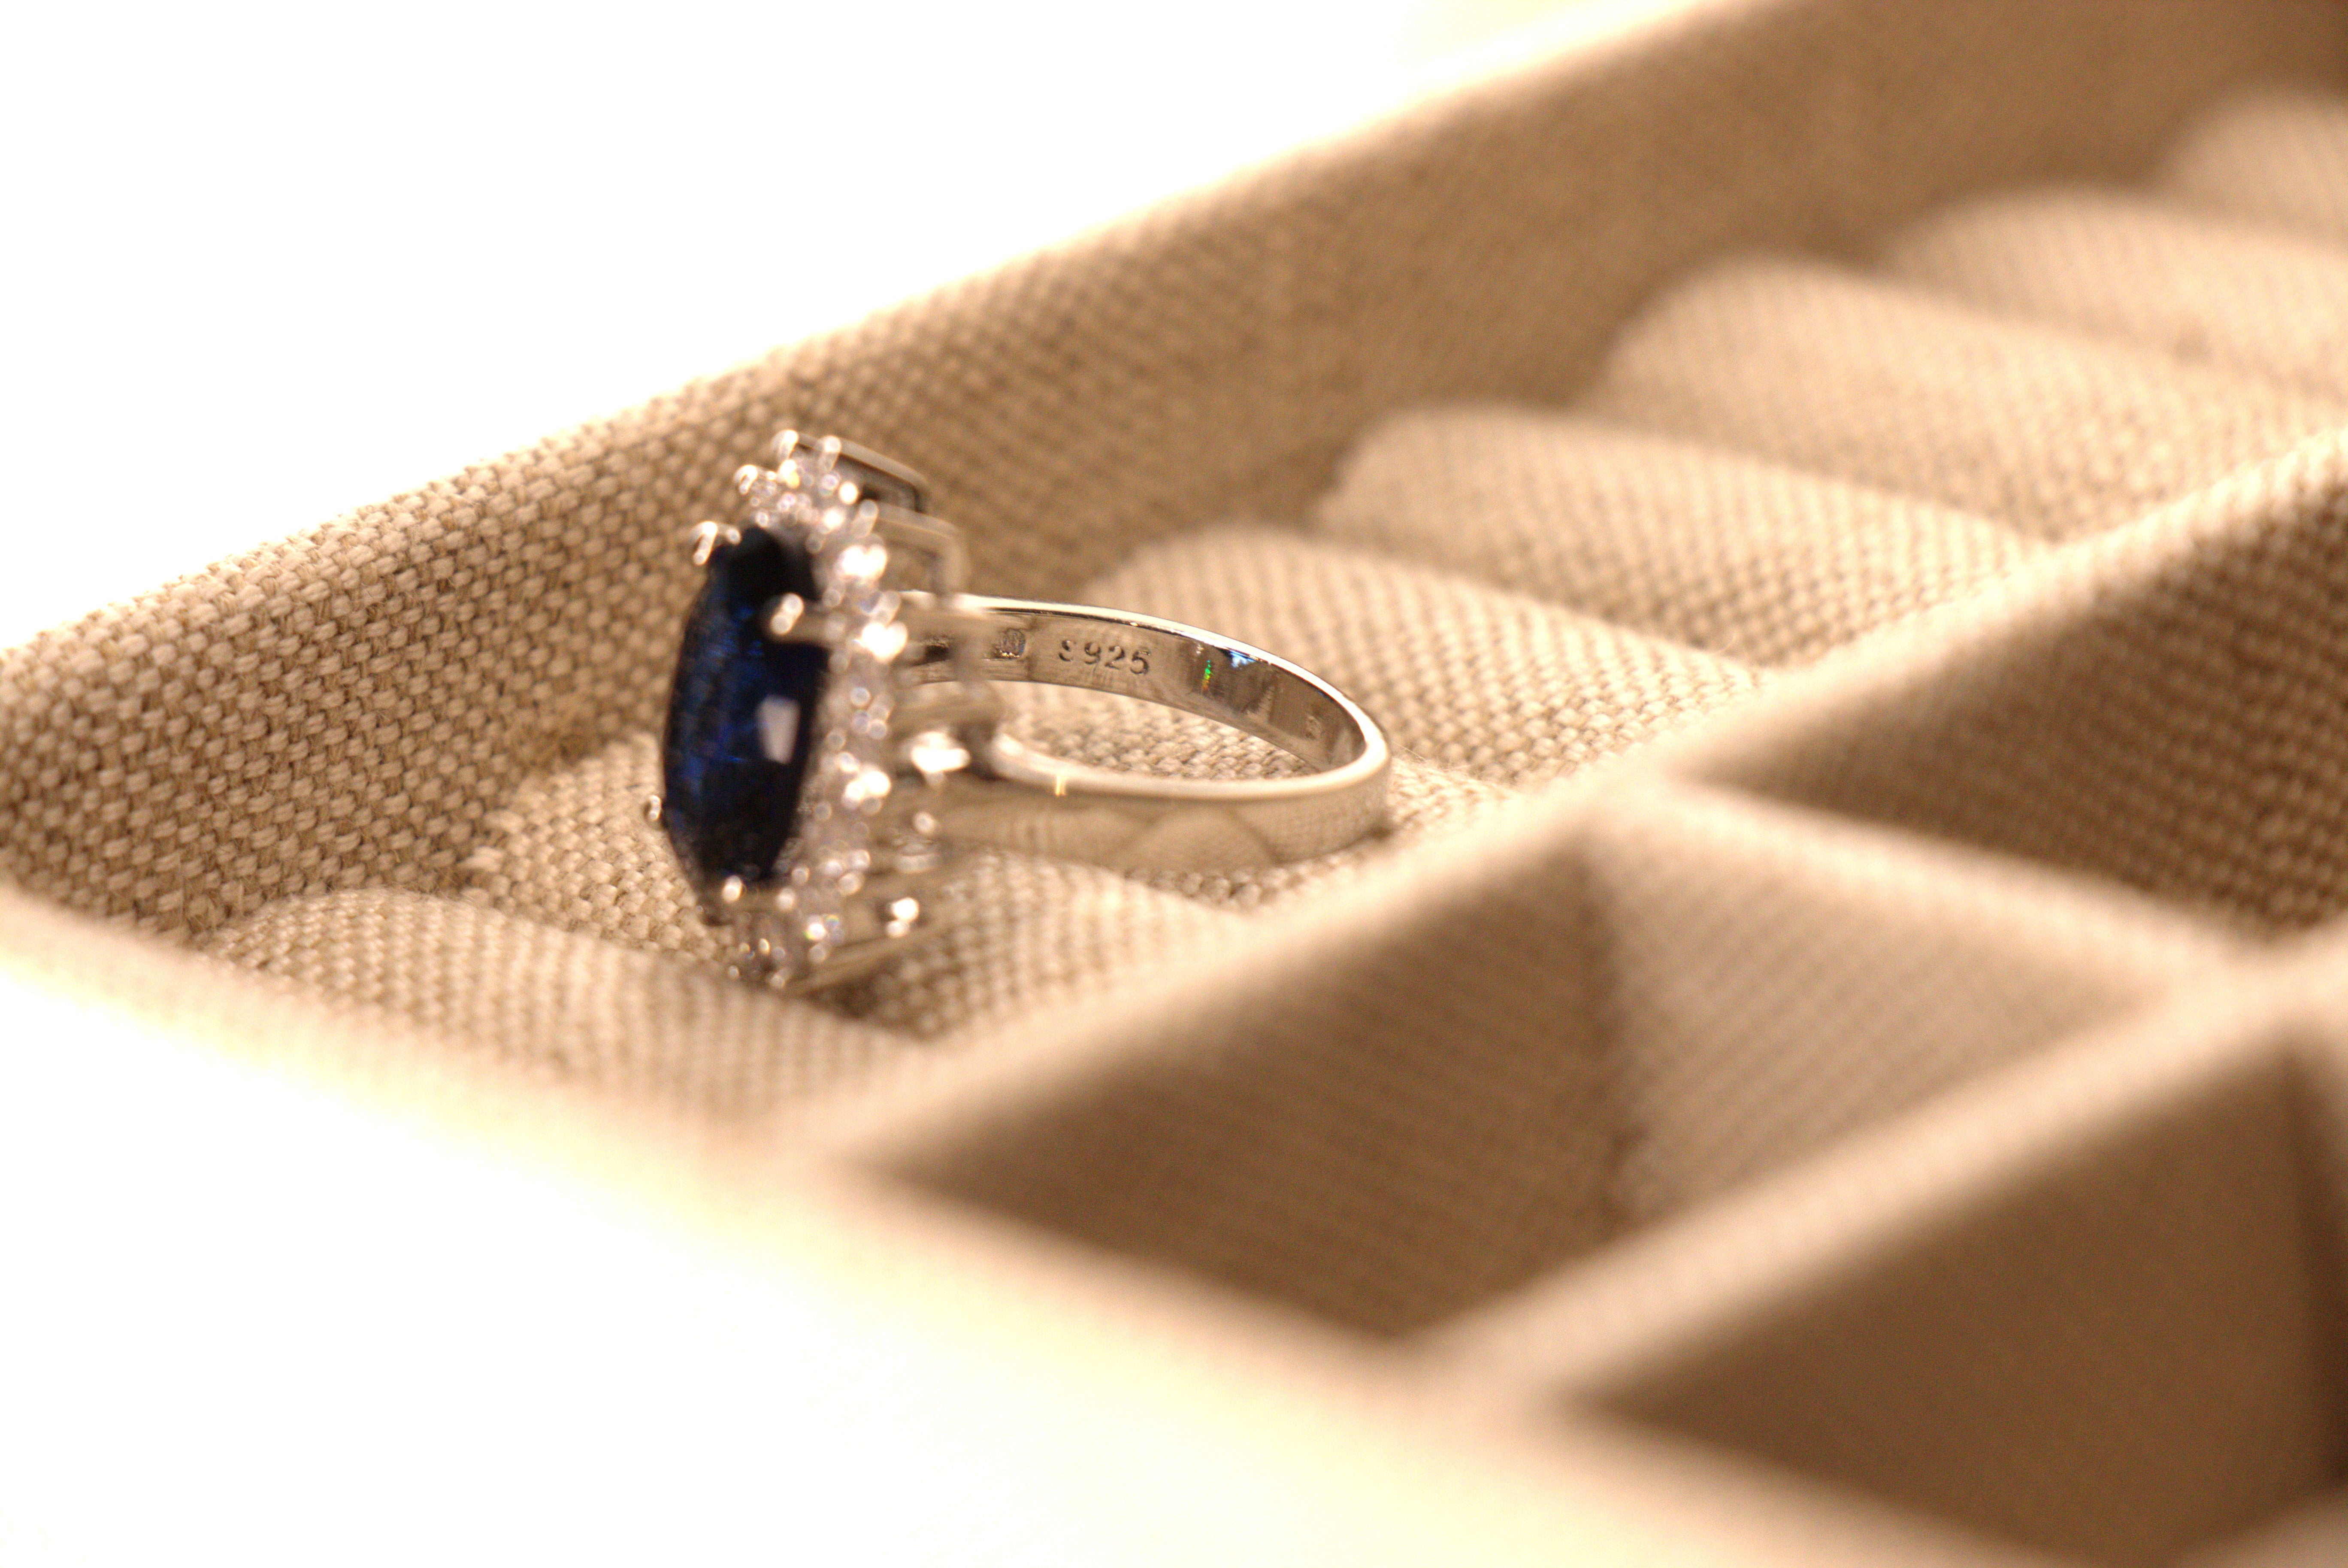 Kate Middleton Inspired Engagement Rings: Get the Look for Less – deBebians